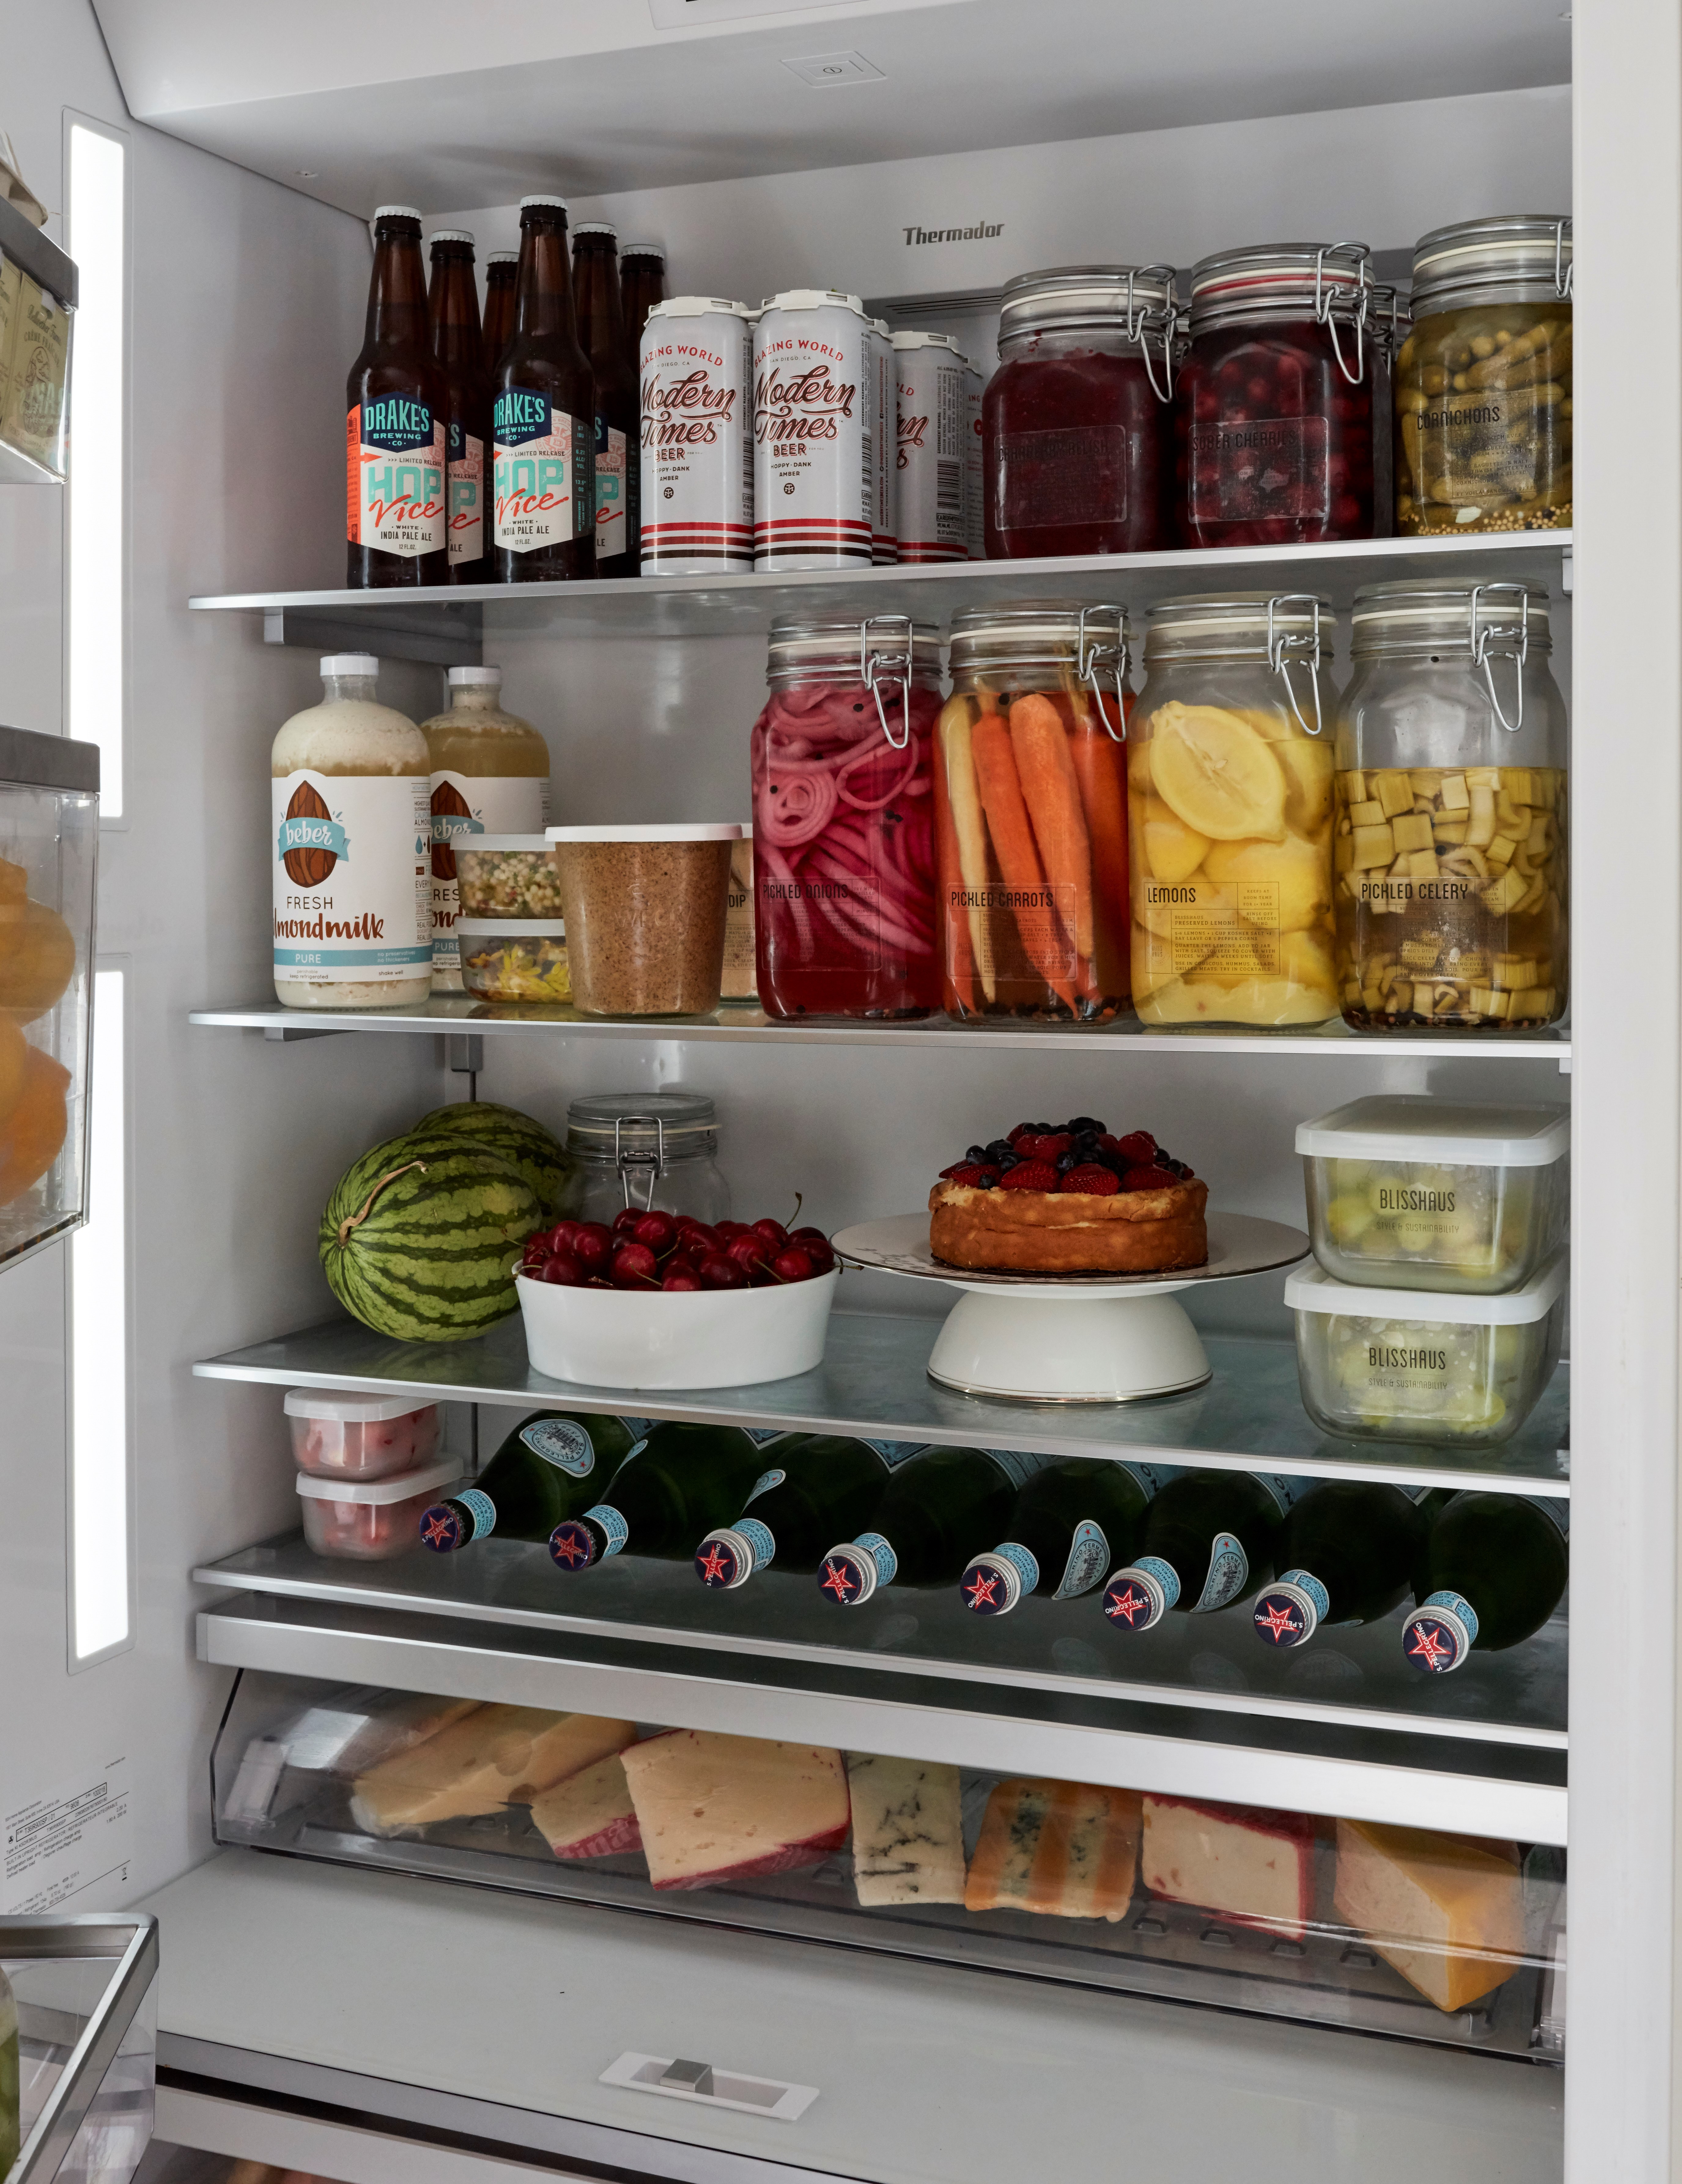 Thermador 7 Steps to Your Refrigerator TA Appliance Blog